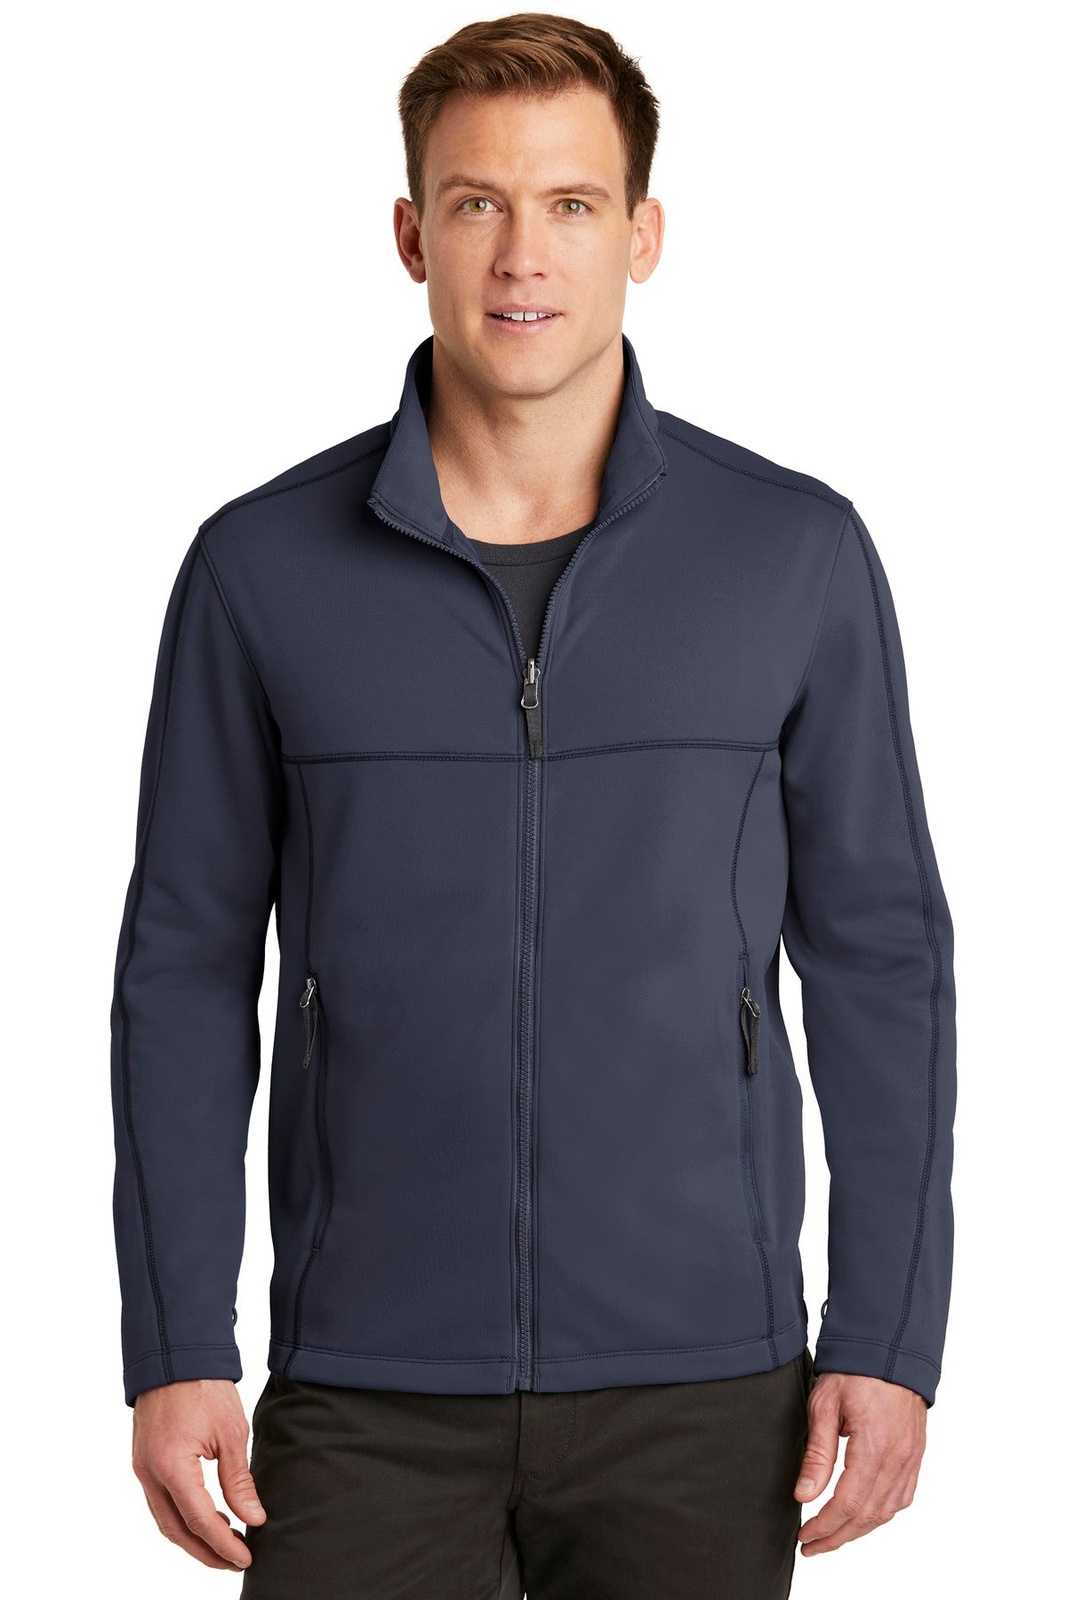 Port Authority F904 Collective Smooth Fleece Jacket - River Blue Navy - HIT a Double - 1